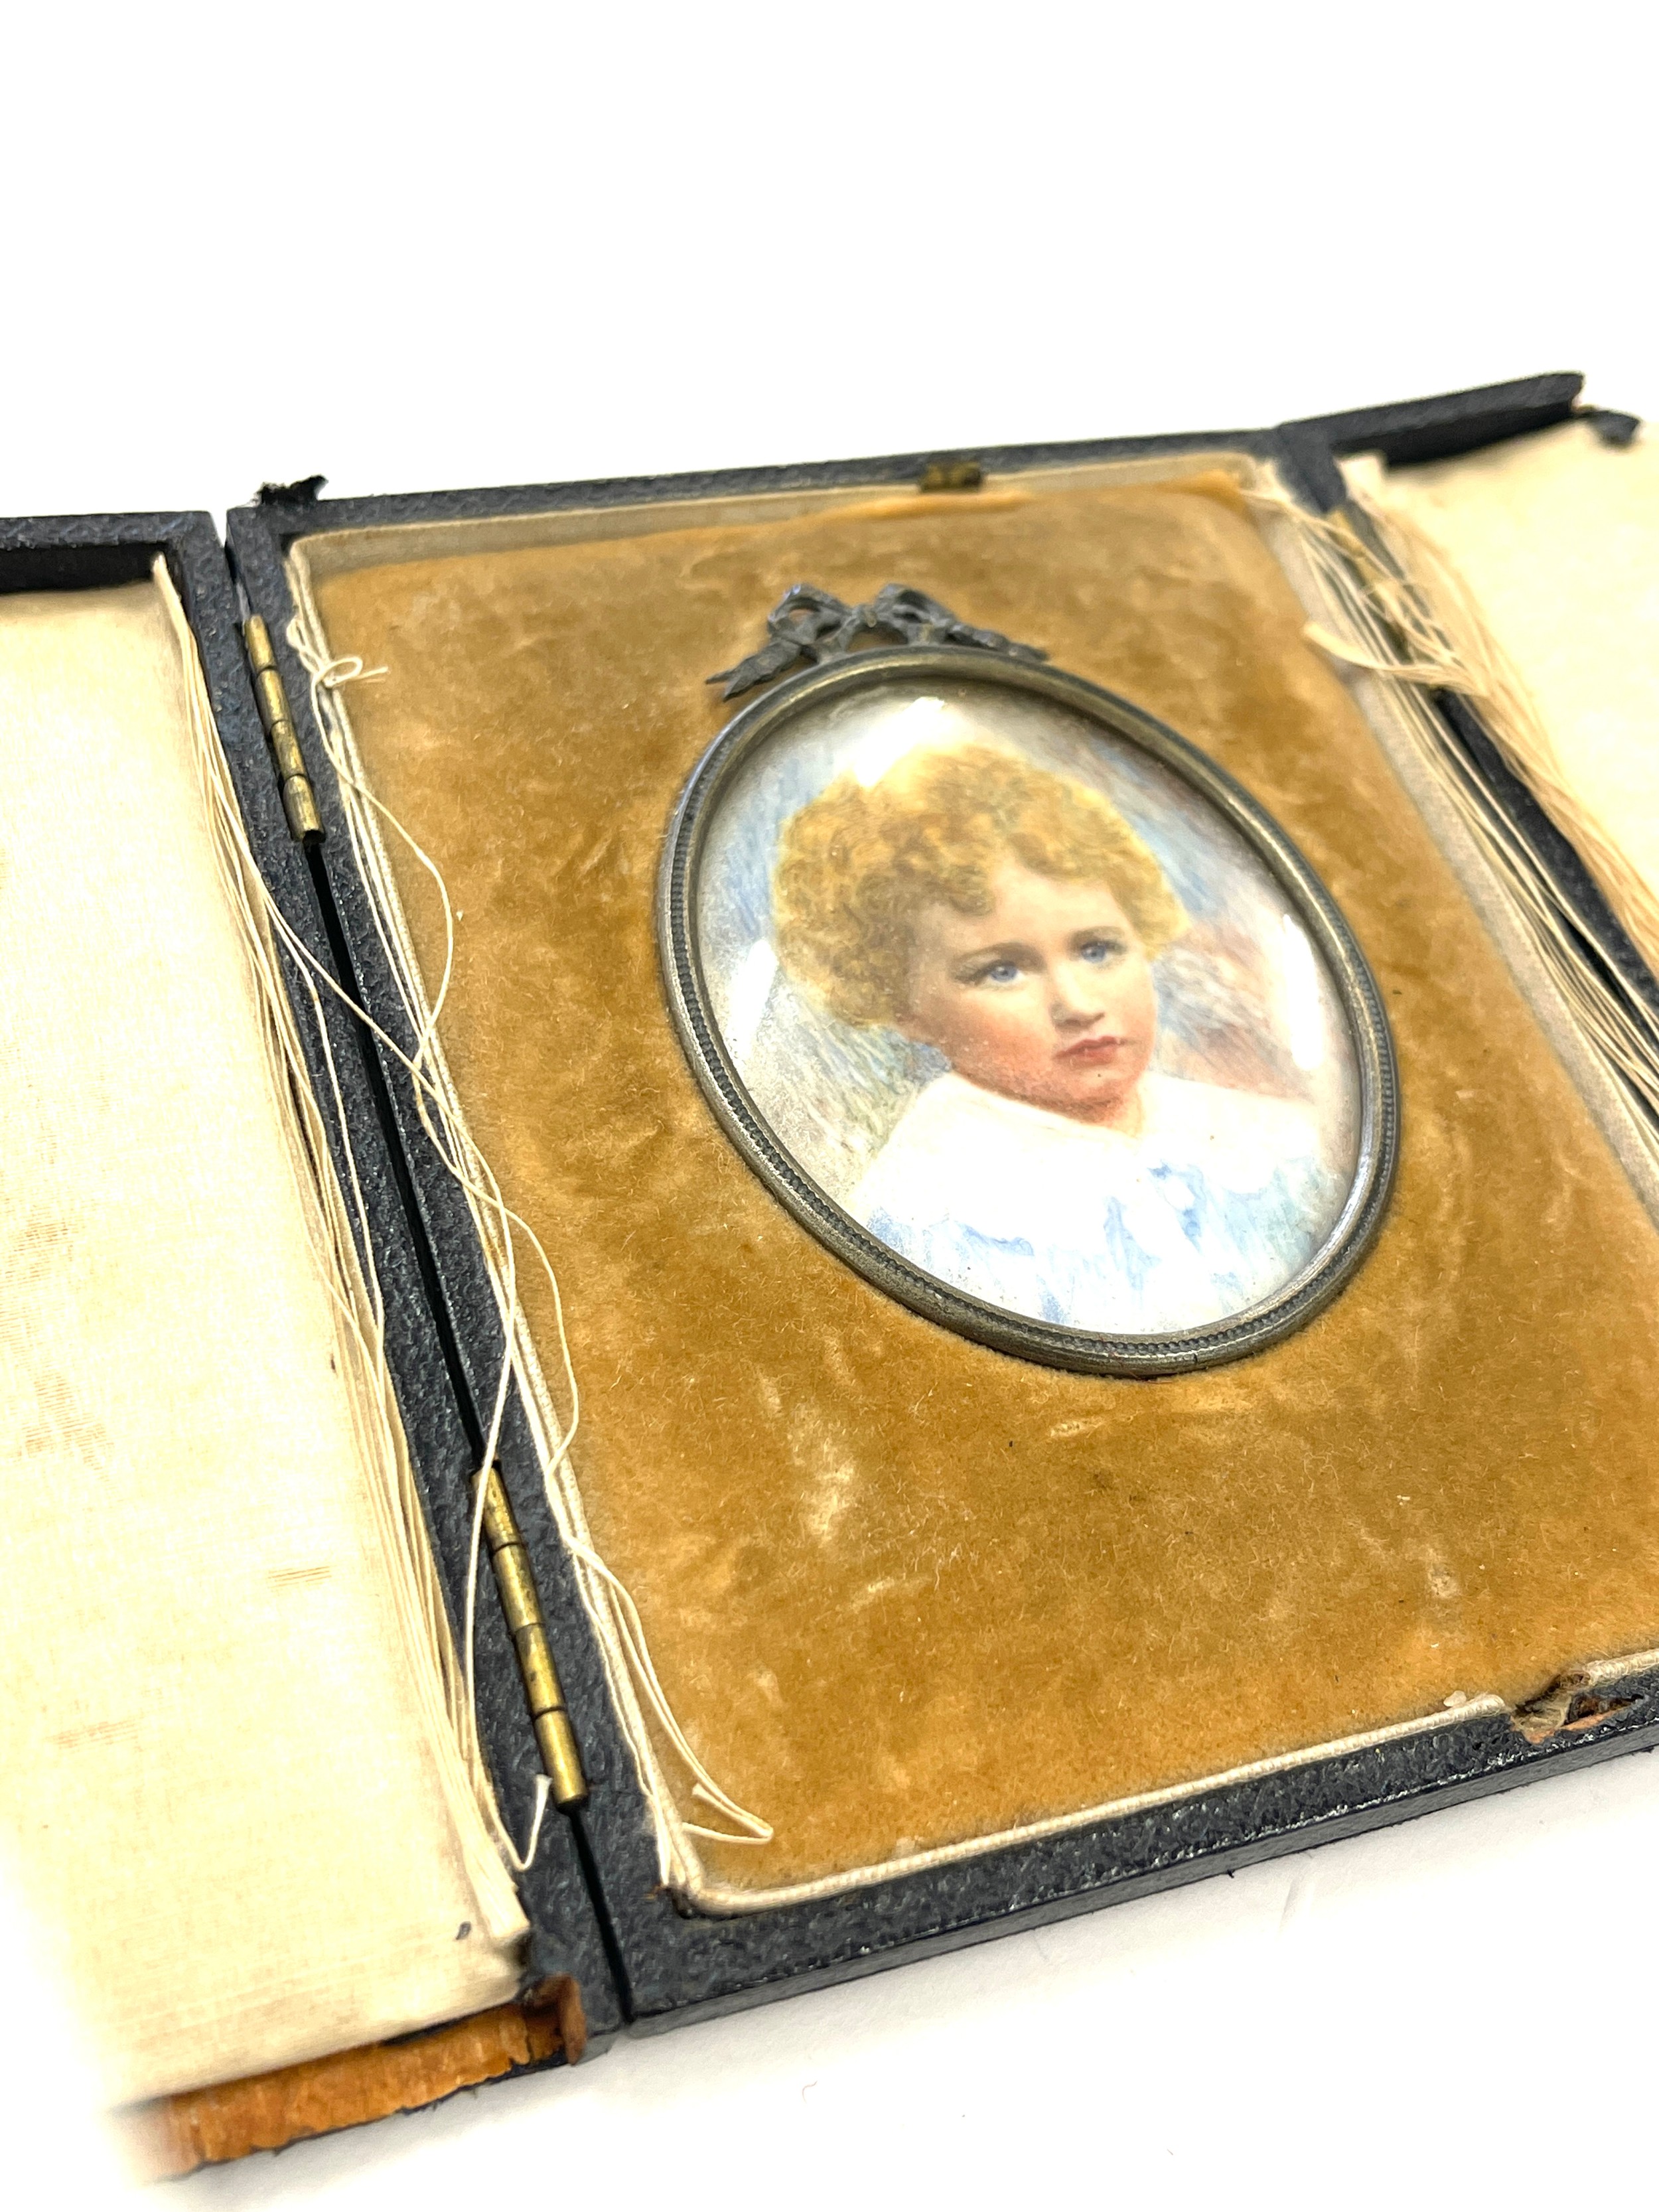 Original hand painted portrait miniature of a young boy in leather case - Image 2 of 3